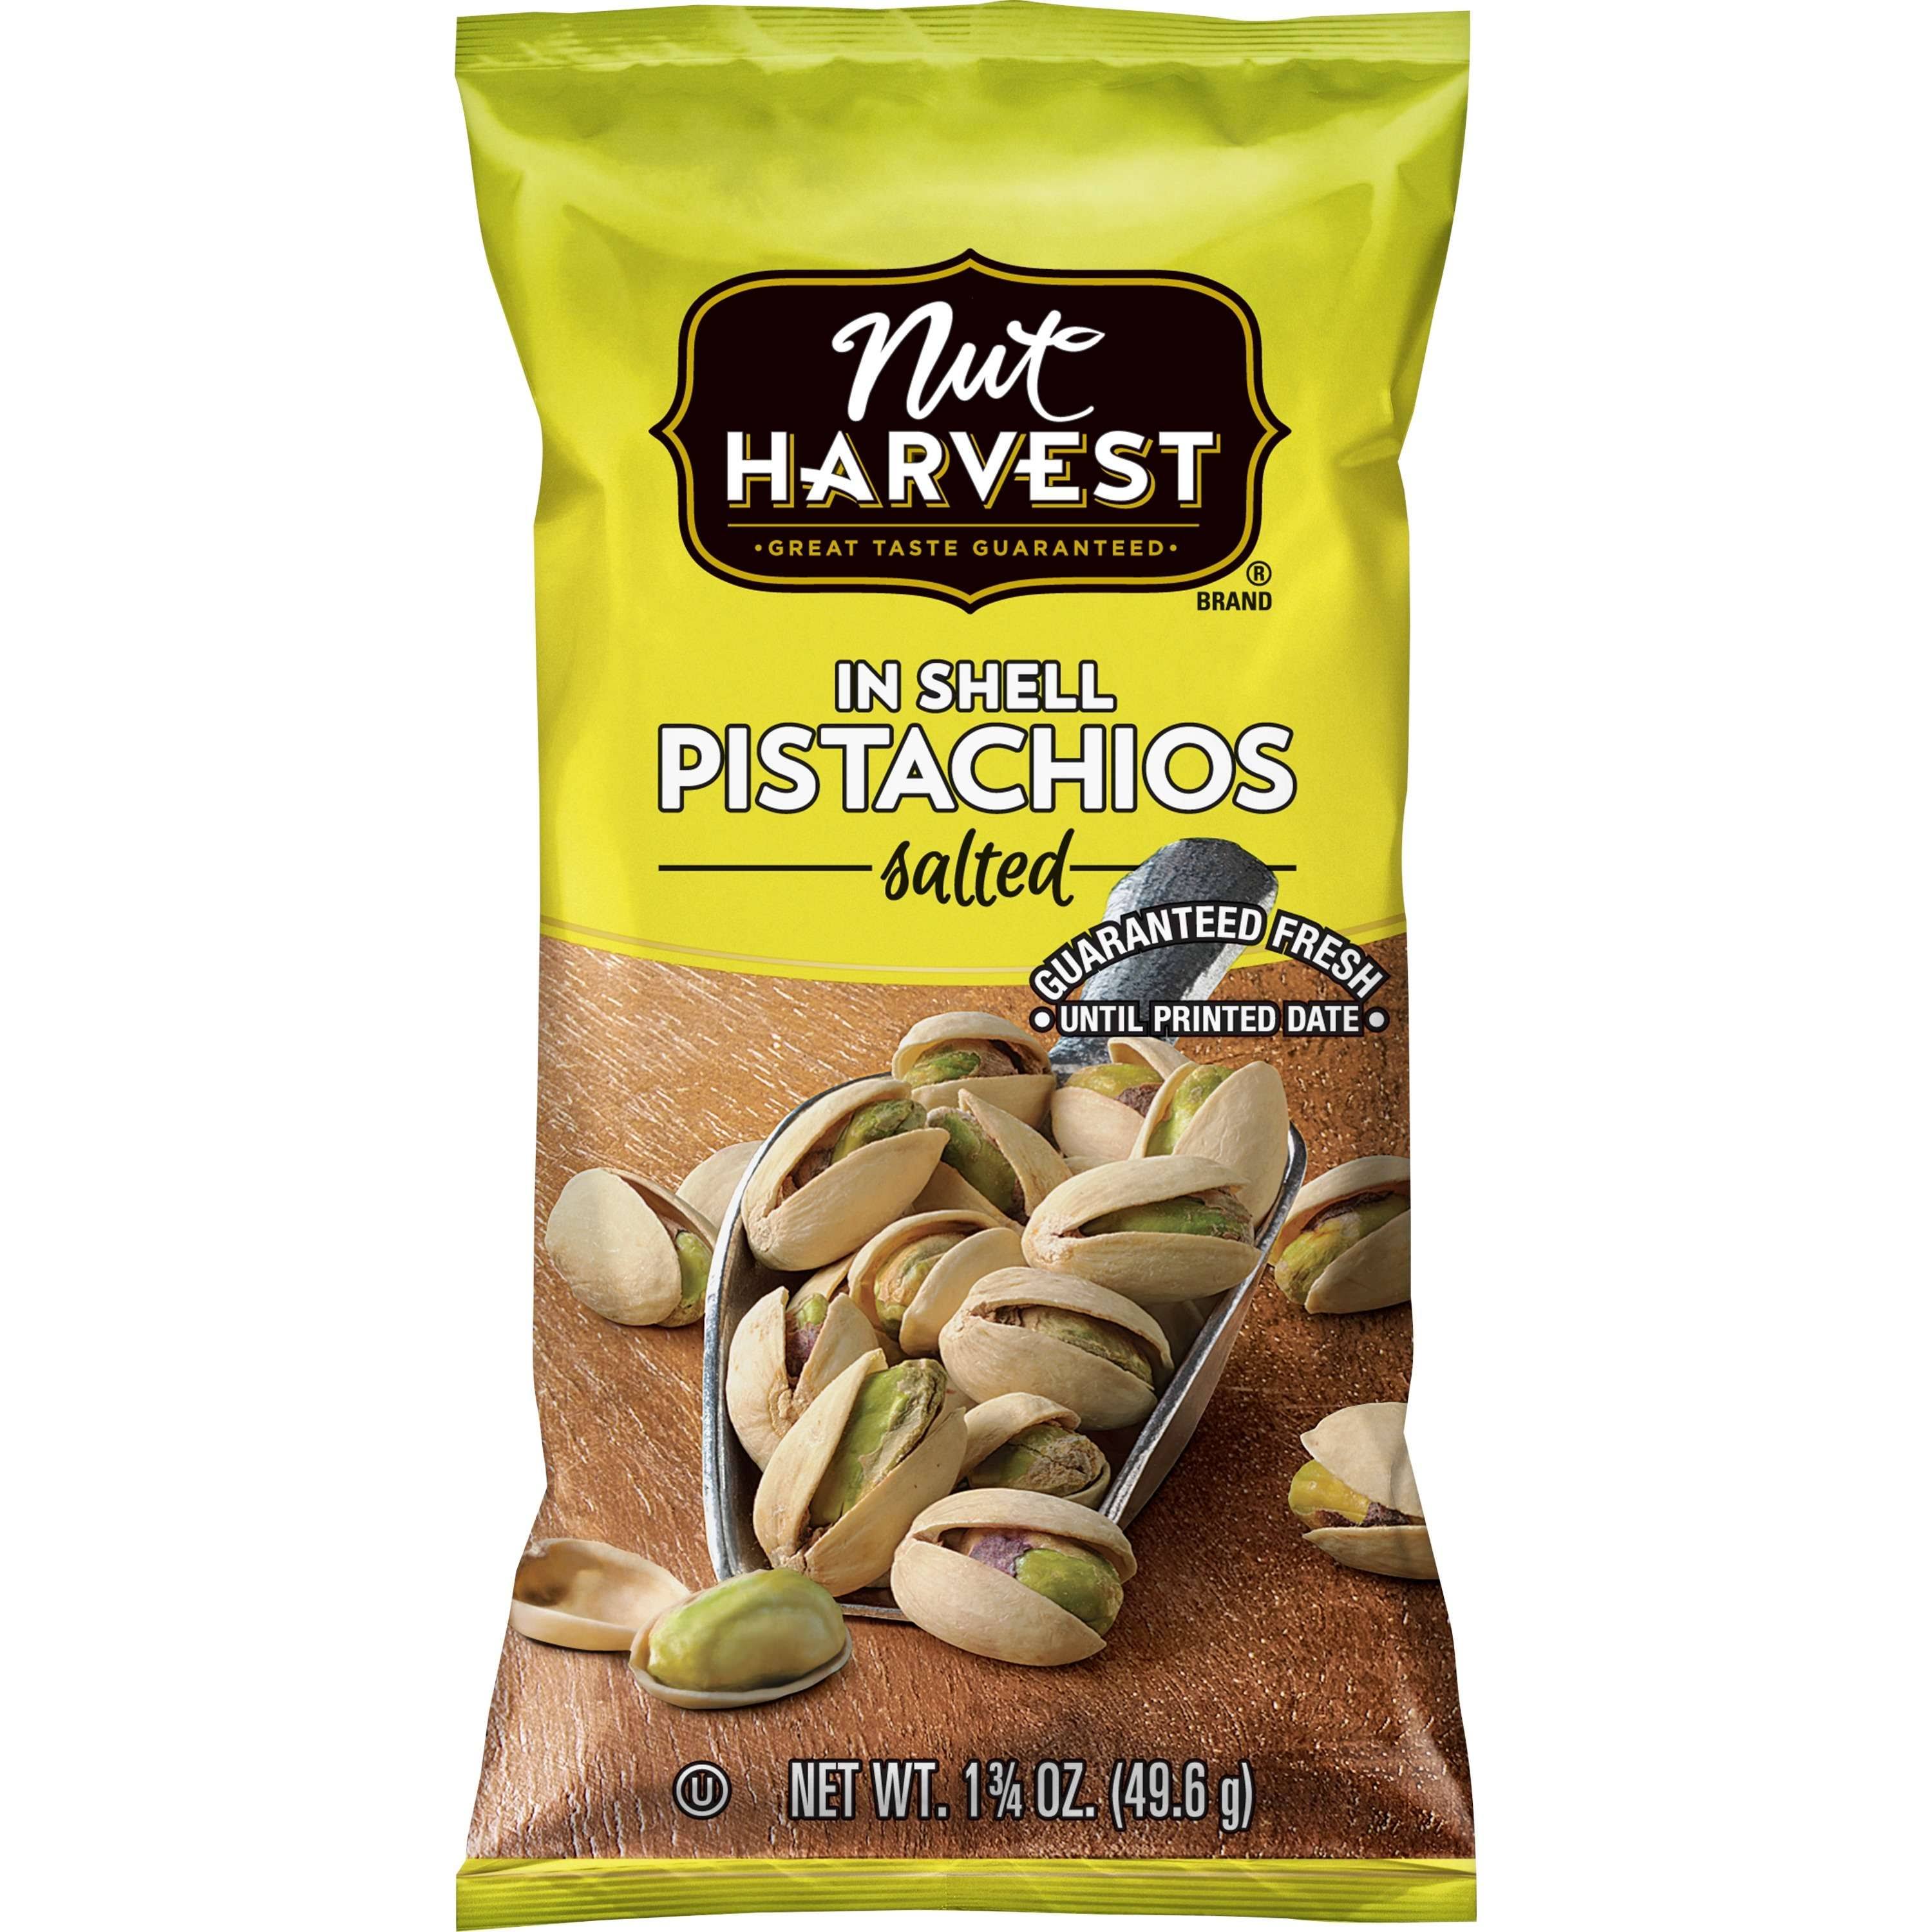 Nut Harvest in Shell Pistachios - Salted, 1.75oz